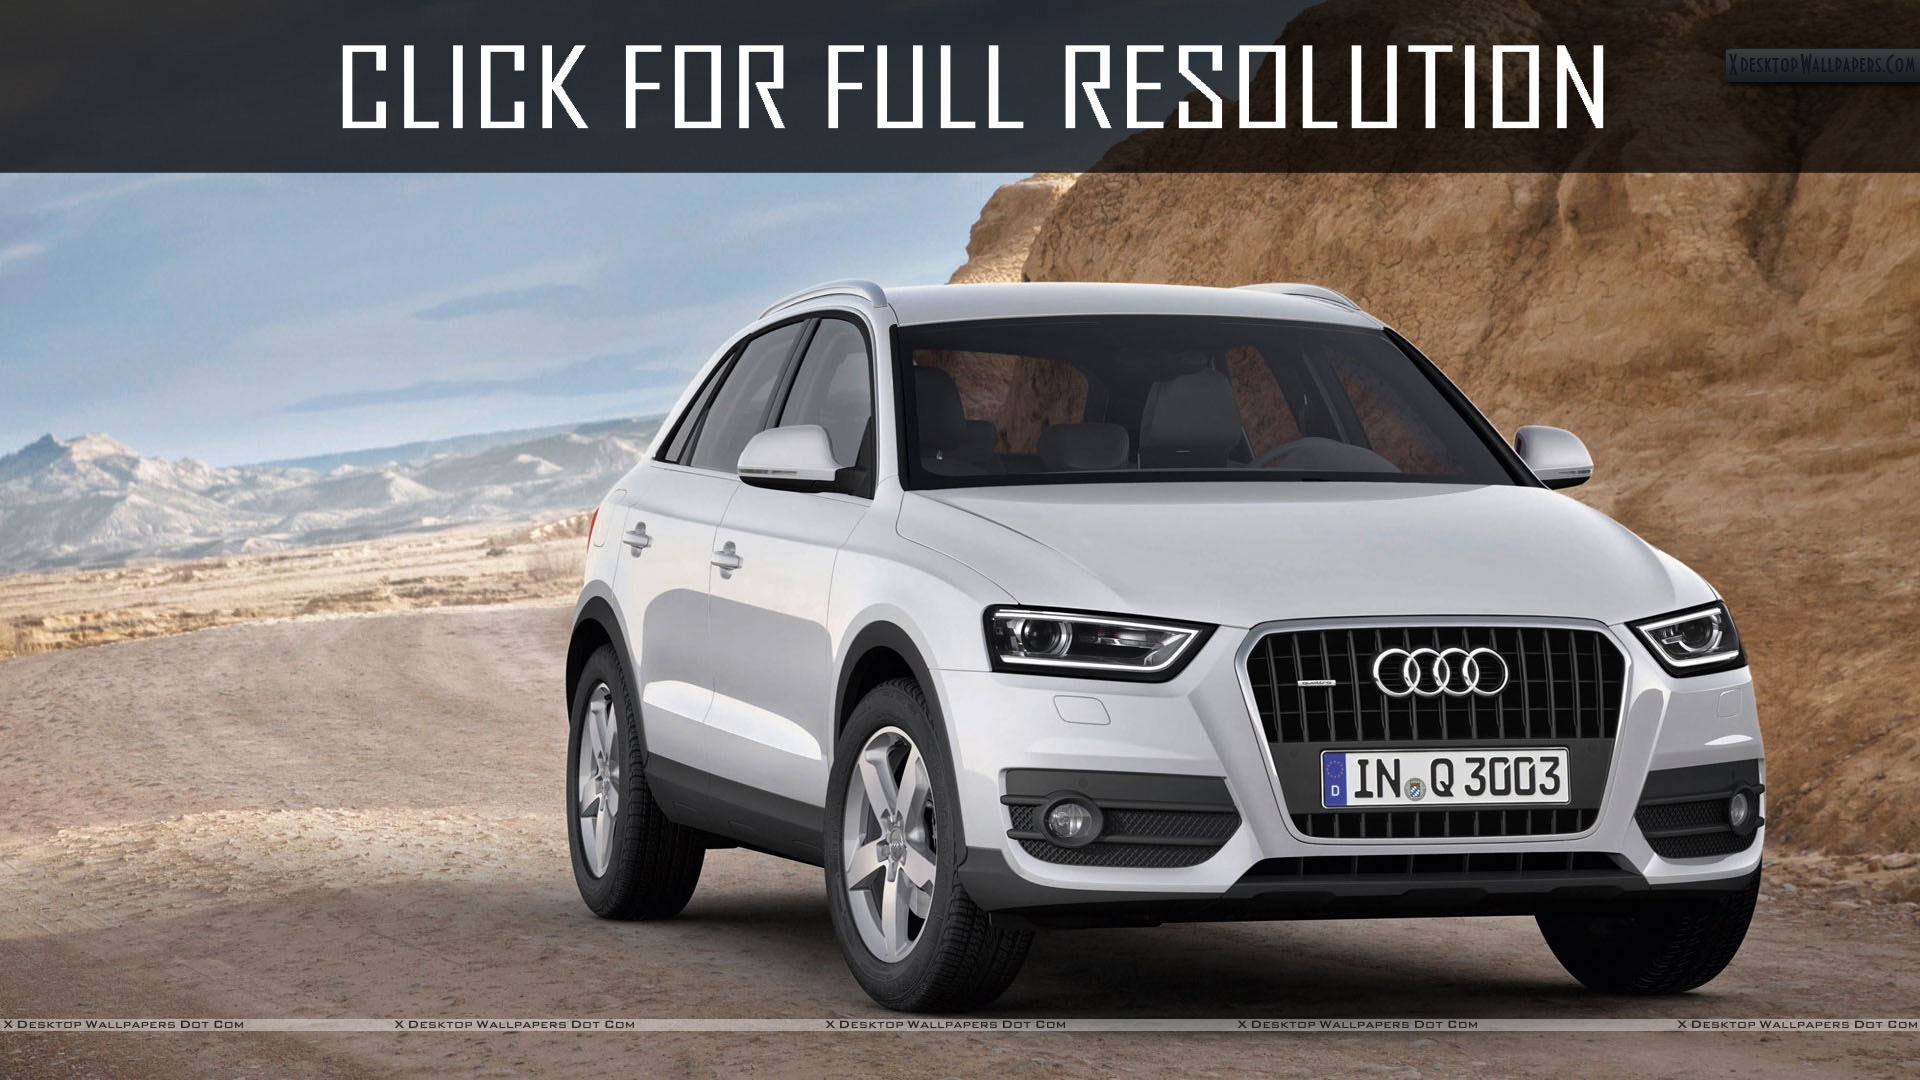 Audi Q3 White amazing photo gallery, some information and